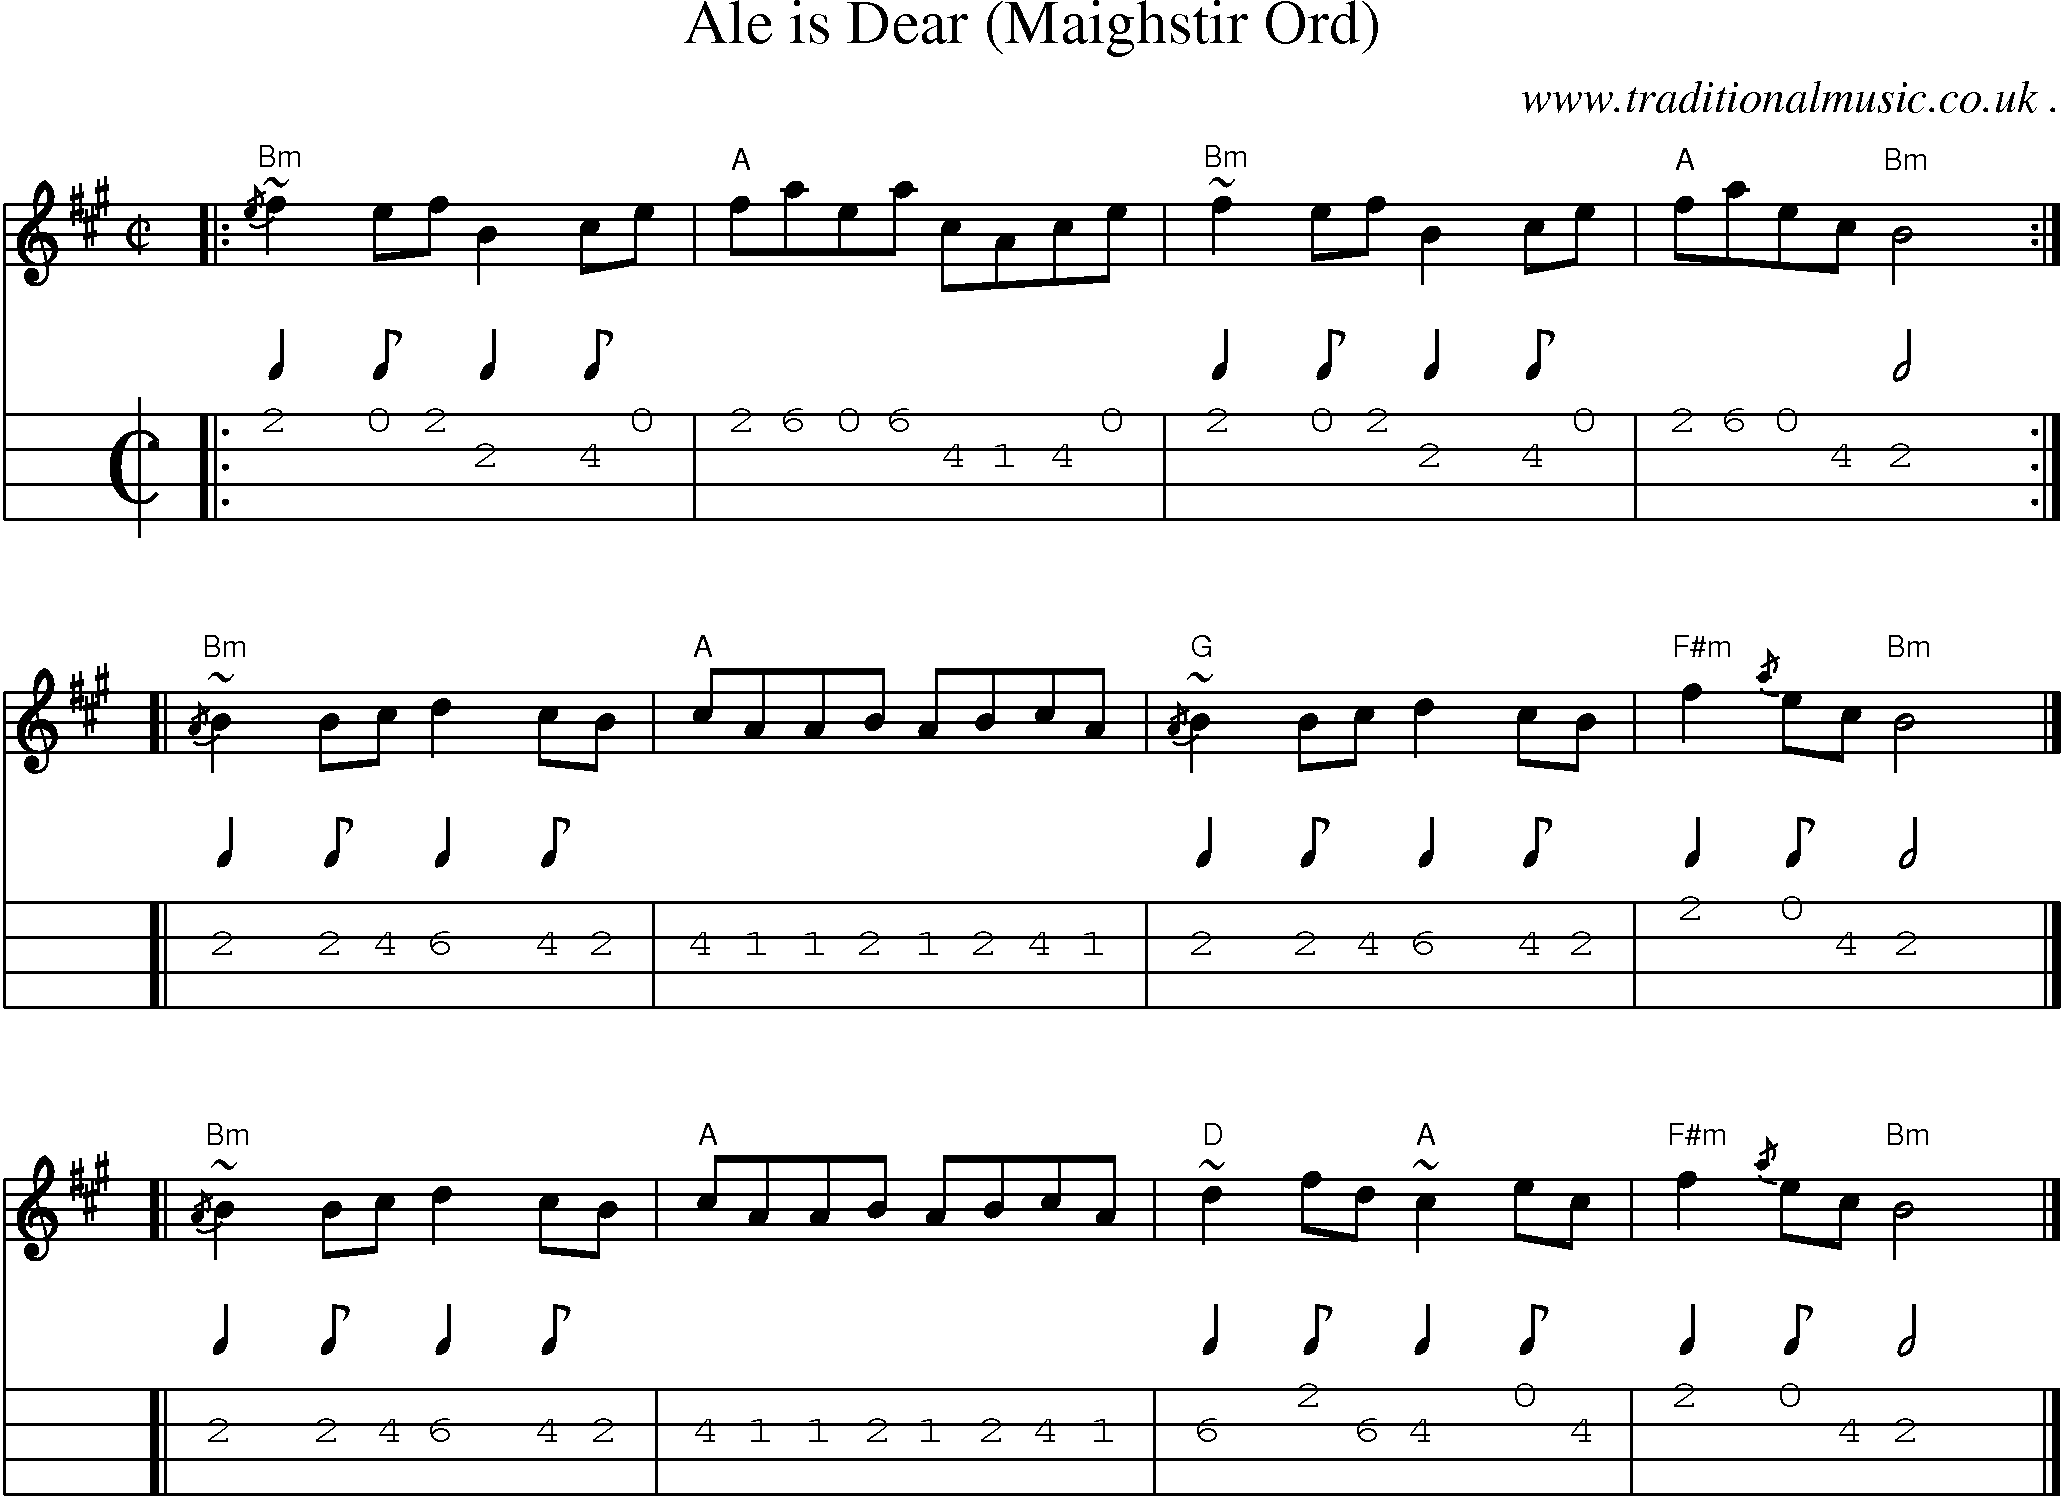 Sheet-music  score, Chords and Mandolin Tabs for Ale Is Dear Maighstir Ord